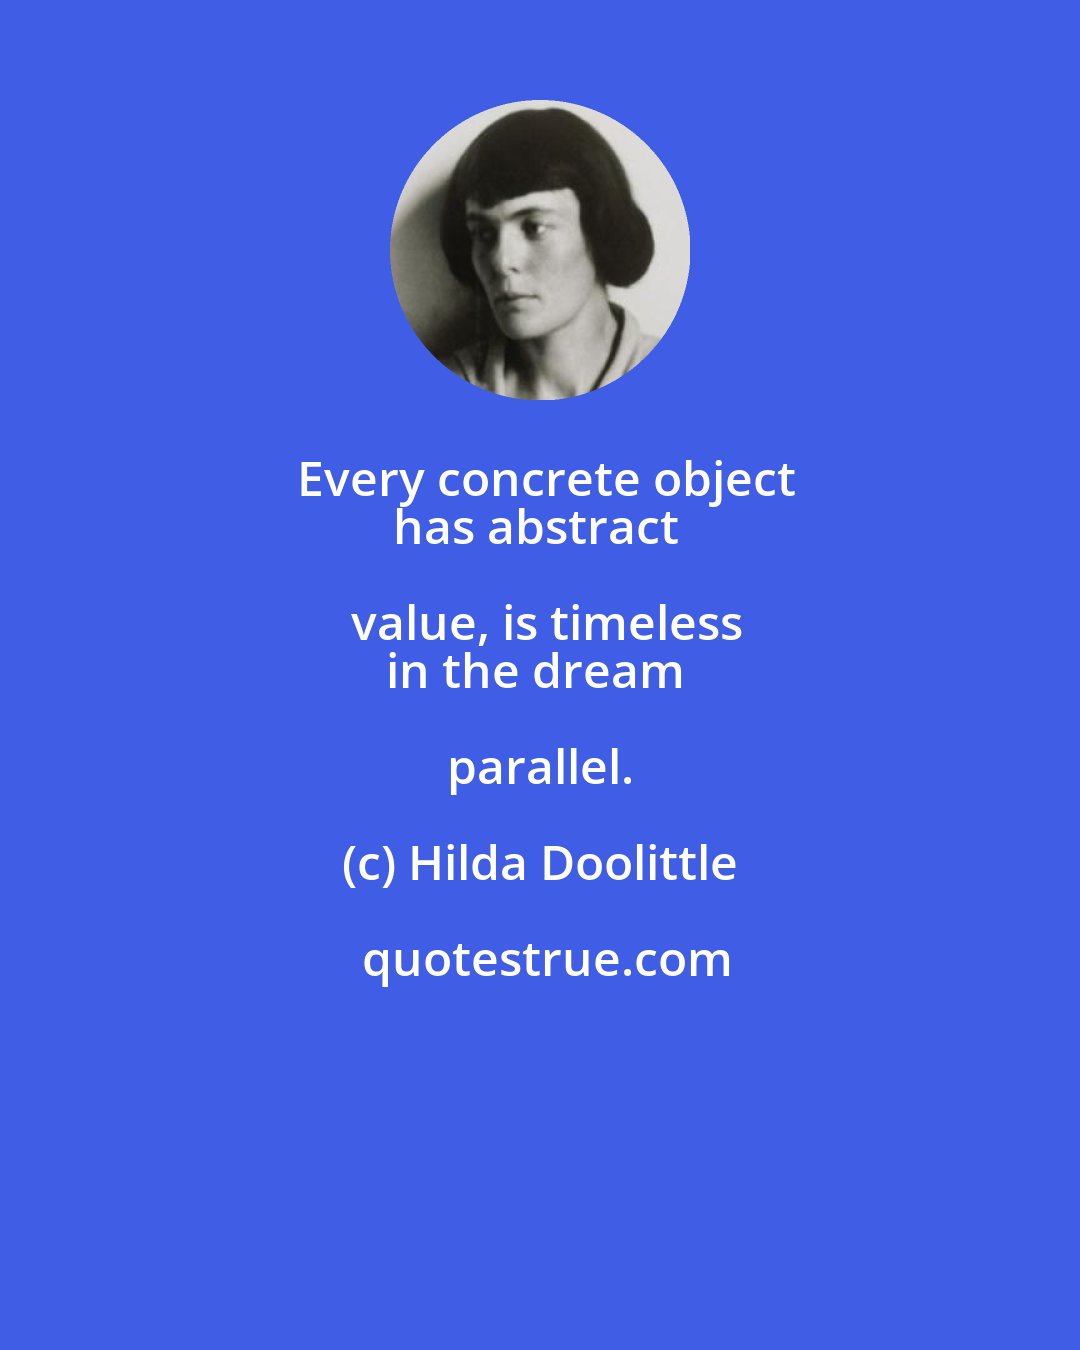 Hilda Doolittle: Every concrete object
has abstract value, is timeless
in the dream parallel.